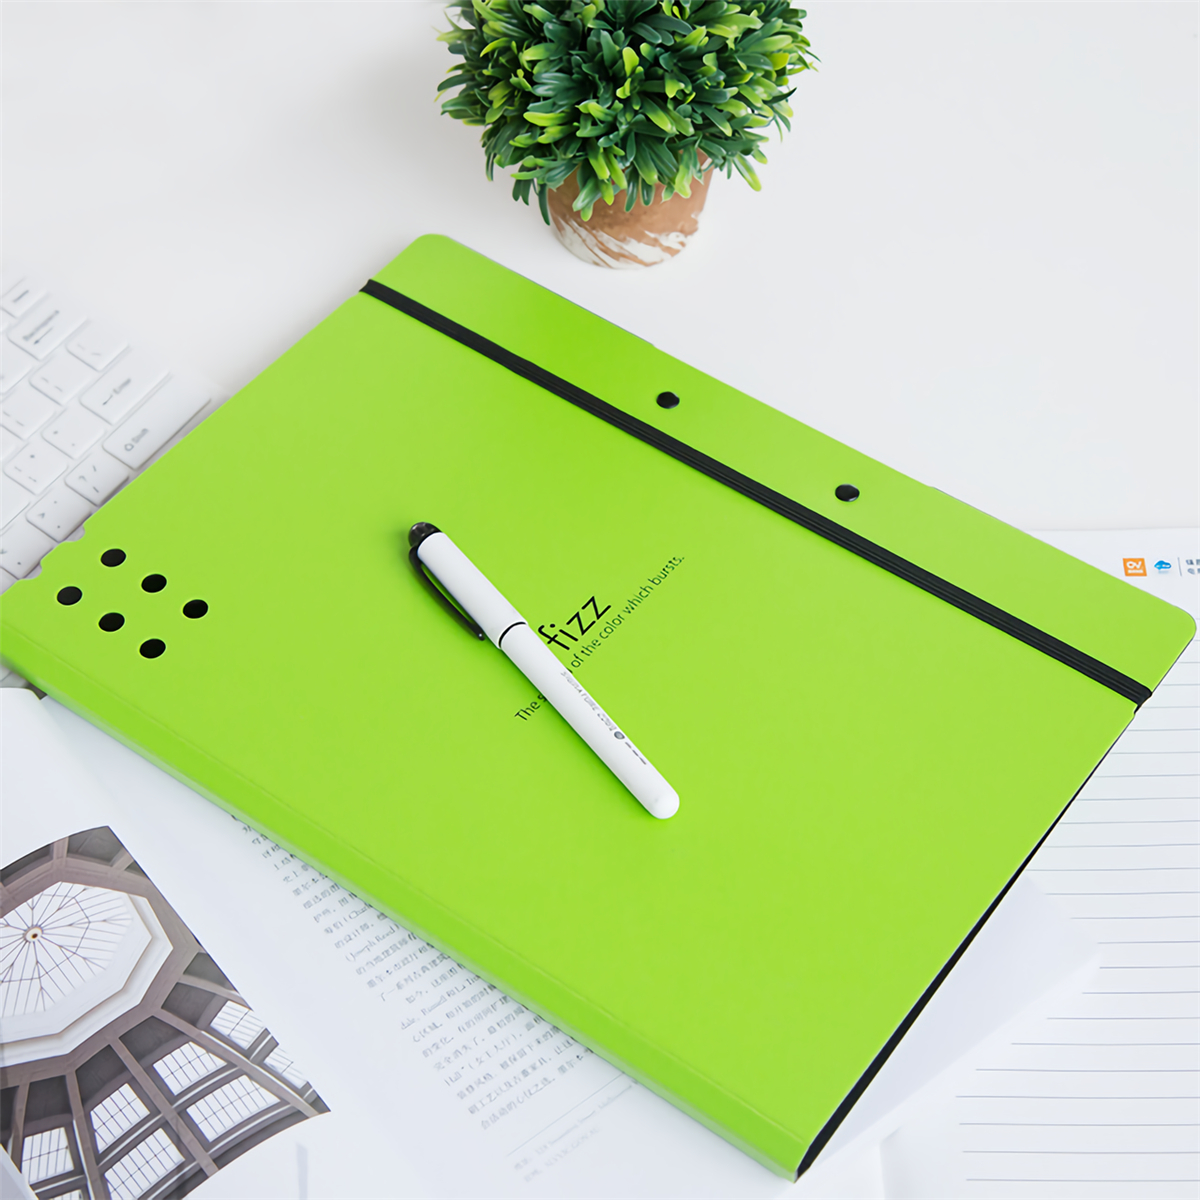 GUANGBO A6382 A4 File Folder High Quality Candy Color Thicken Test Paper Clip Holder Plywood Document Folder Office School Supplies